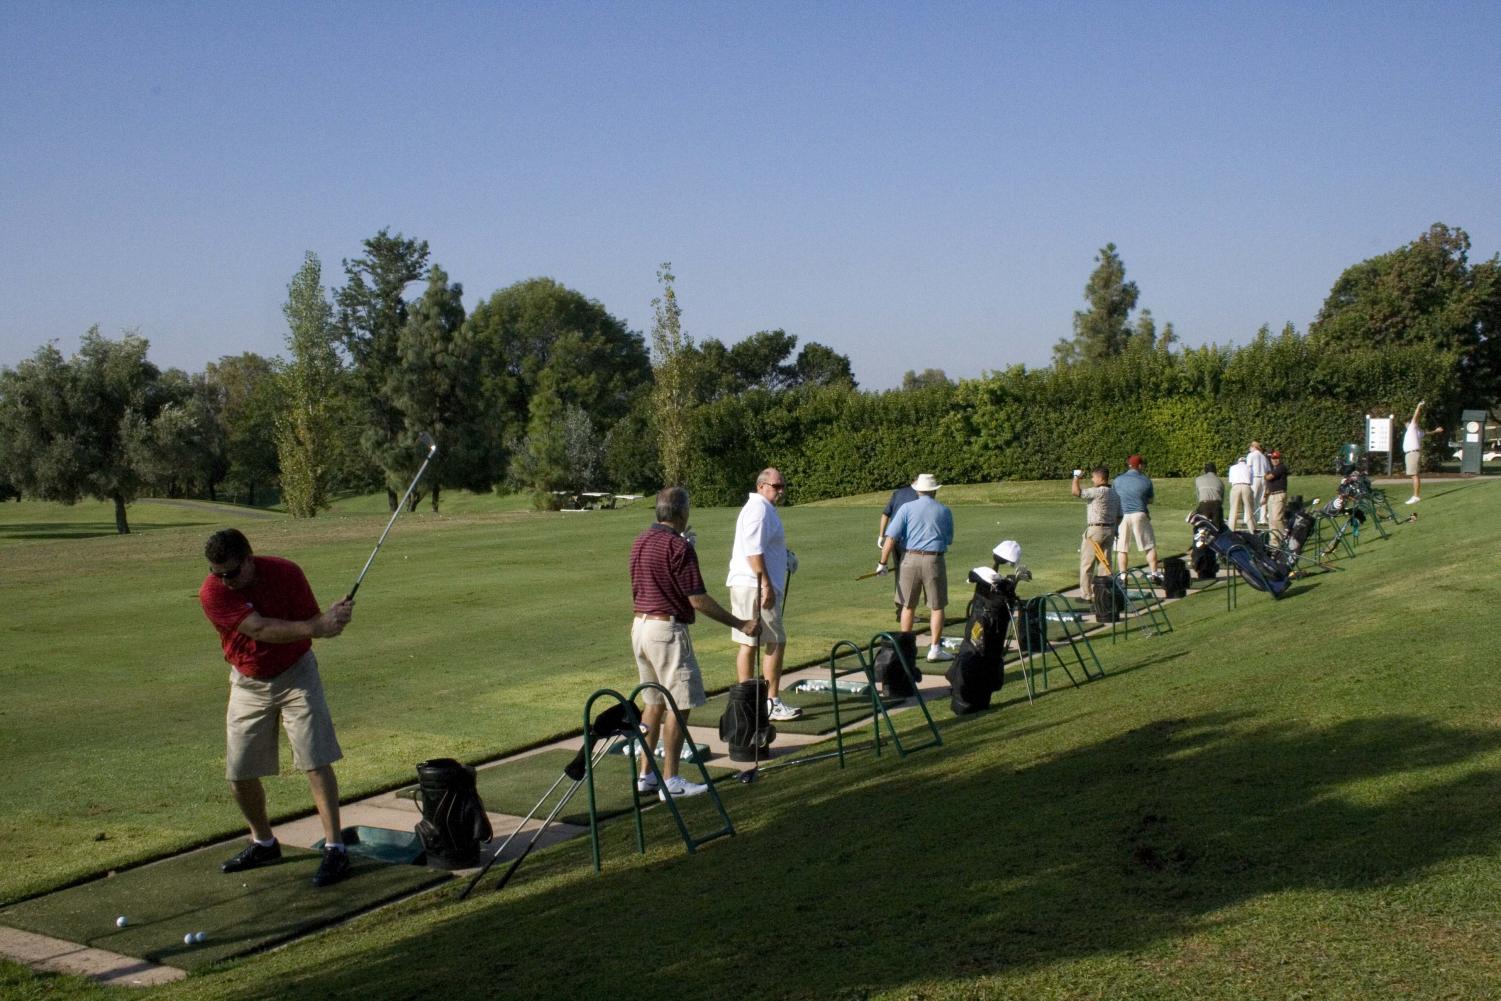 Golfers practice at the driving range before the 29th annual Biola Golf Tournament, a fundraiser.